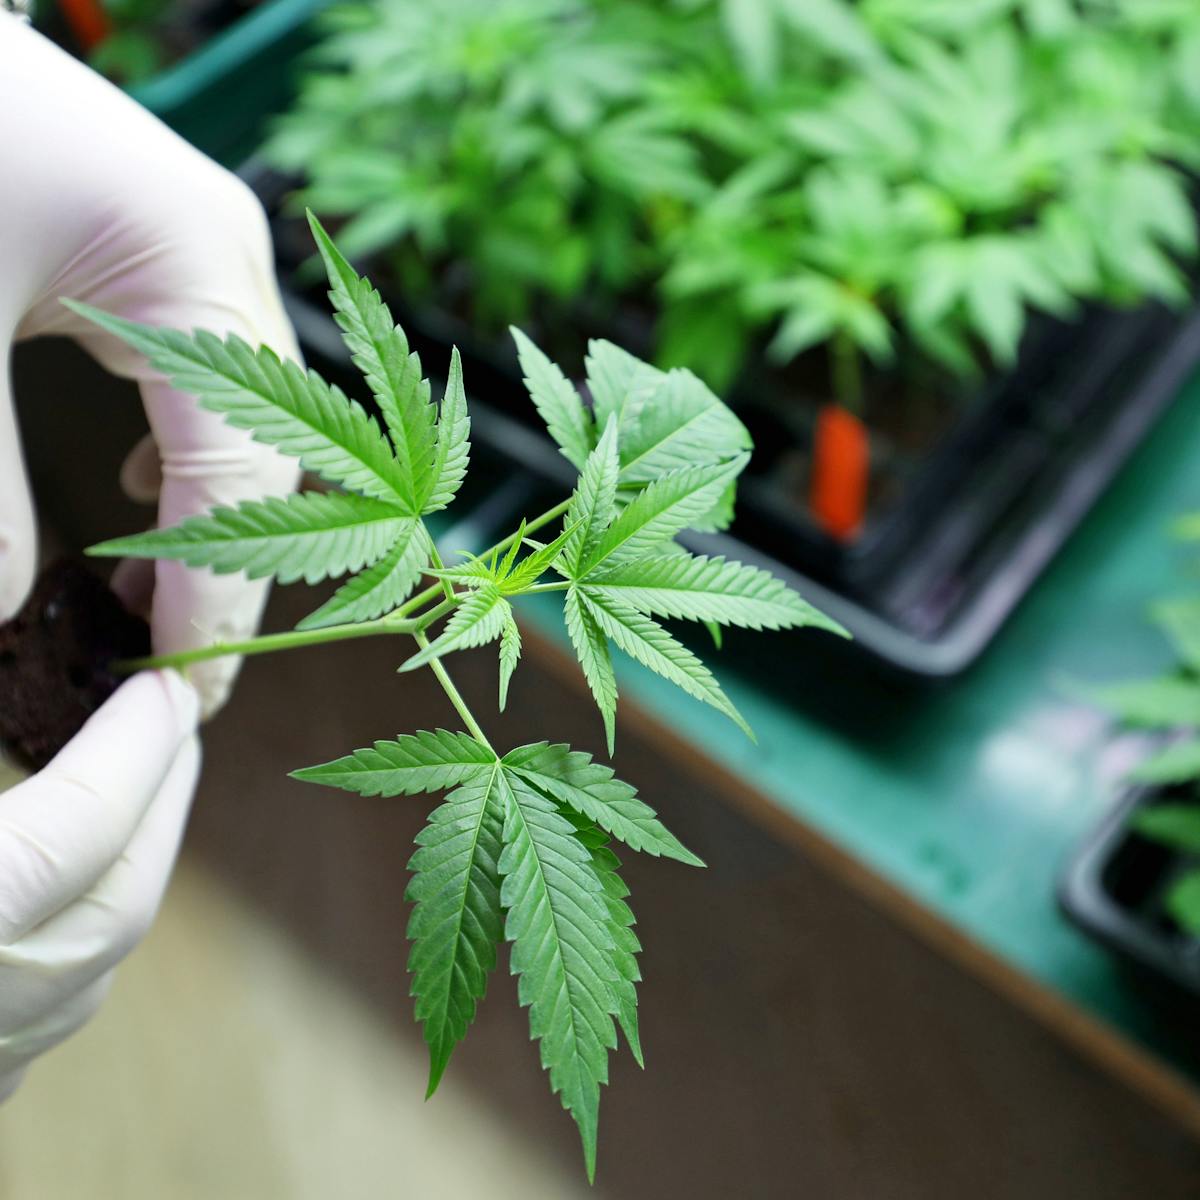 Cannabis is no better than a placebo for treating pain – new research